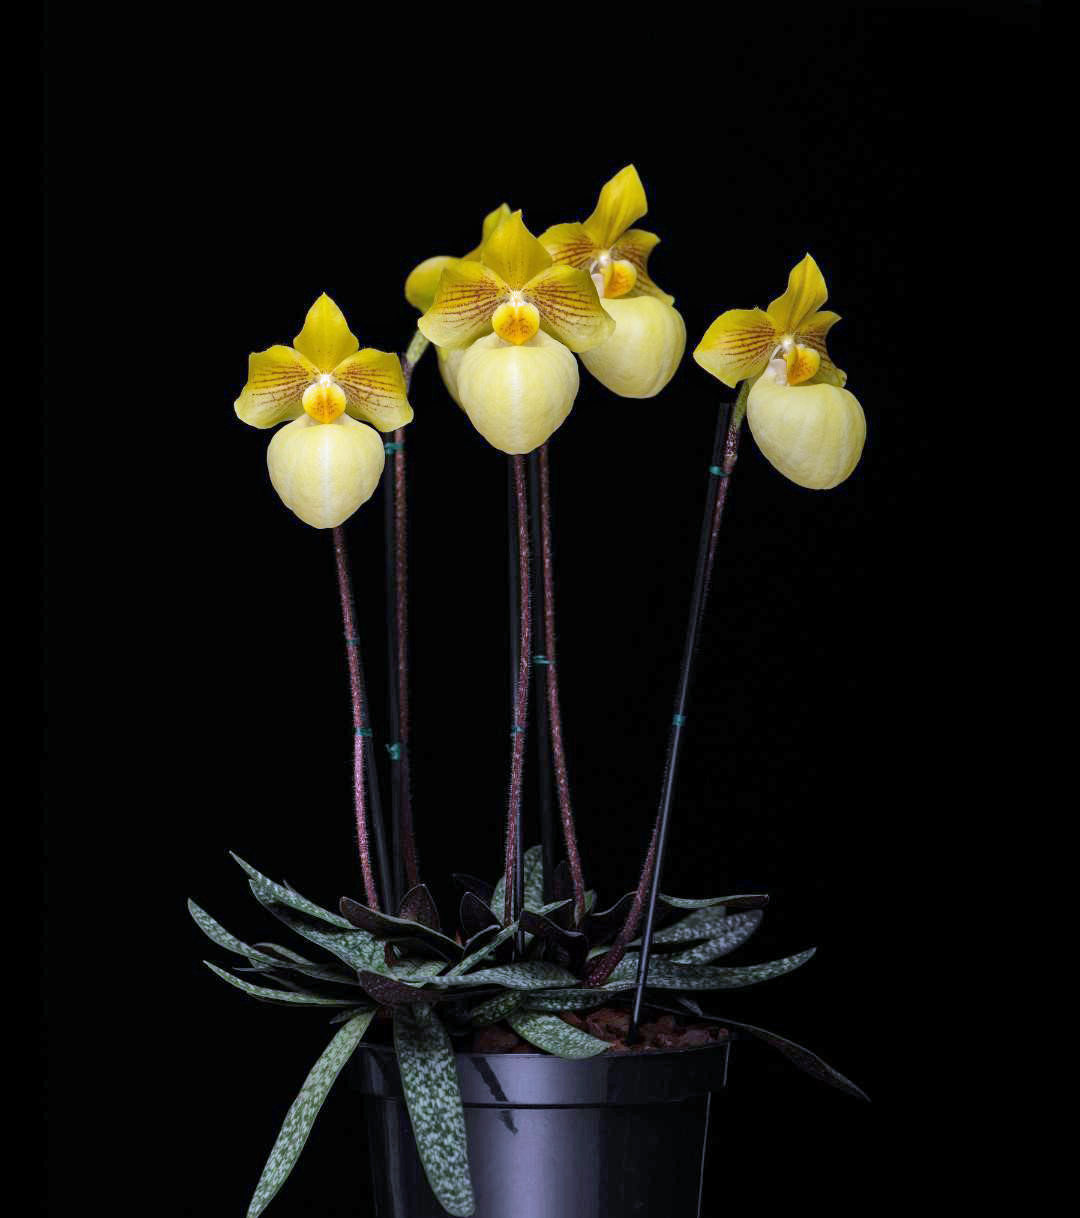 Paphiopedilum Fumi's Delight grown by Malcolm Moodie, RHS Certificate of Cultural Commendation